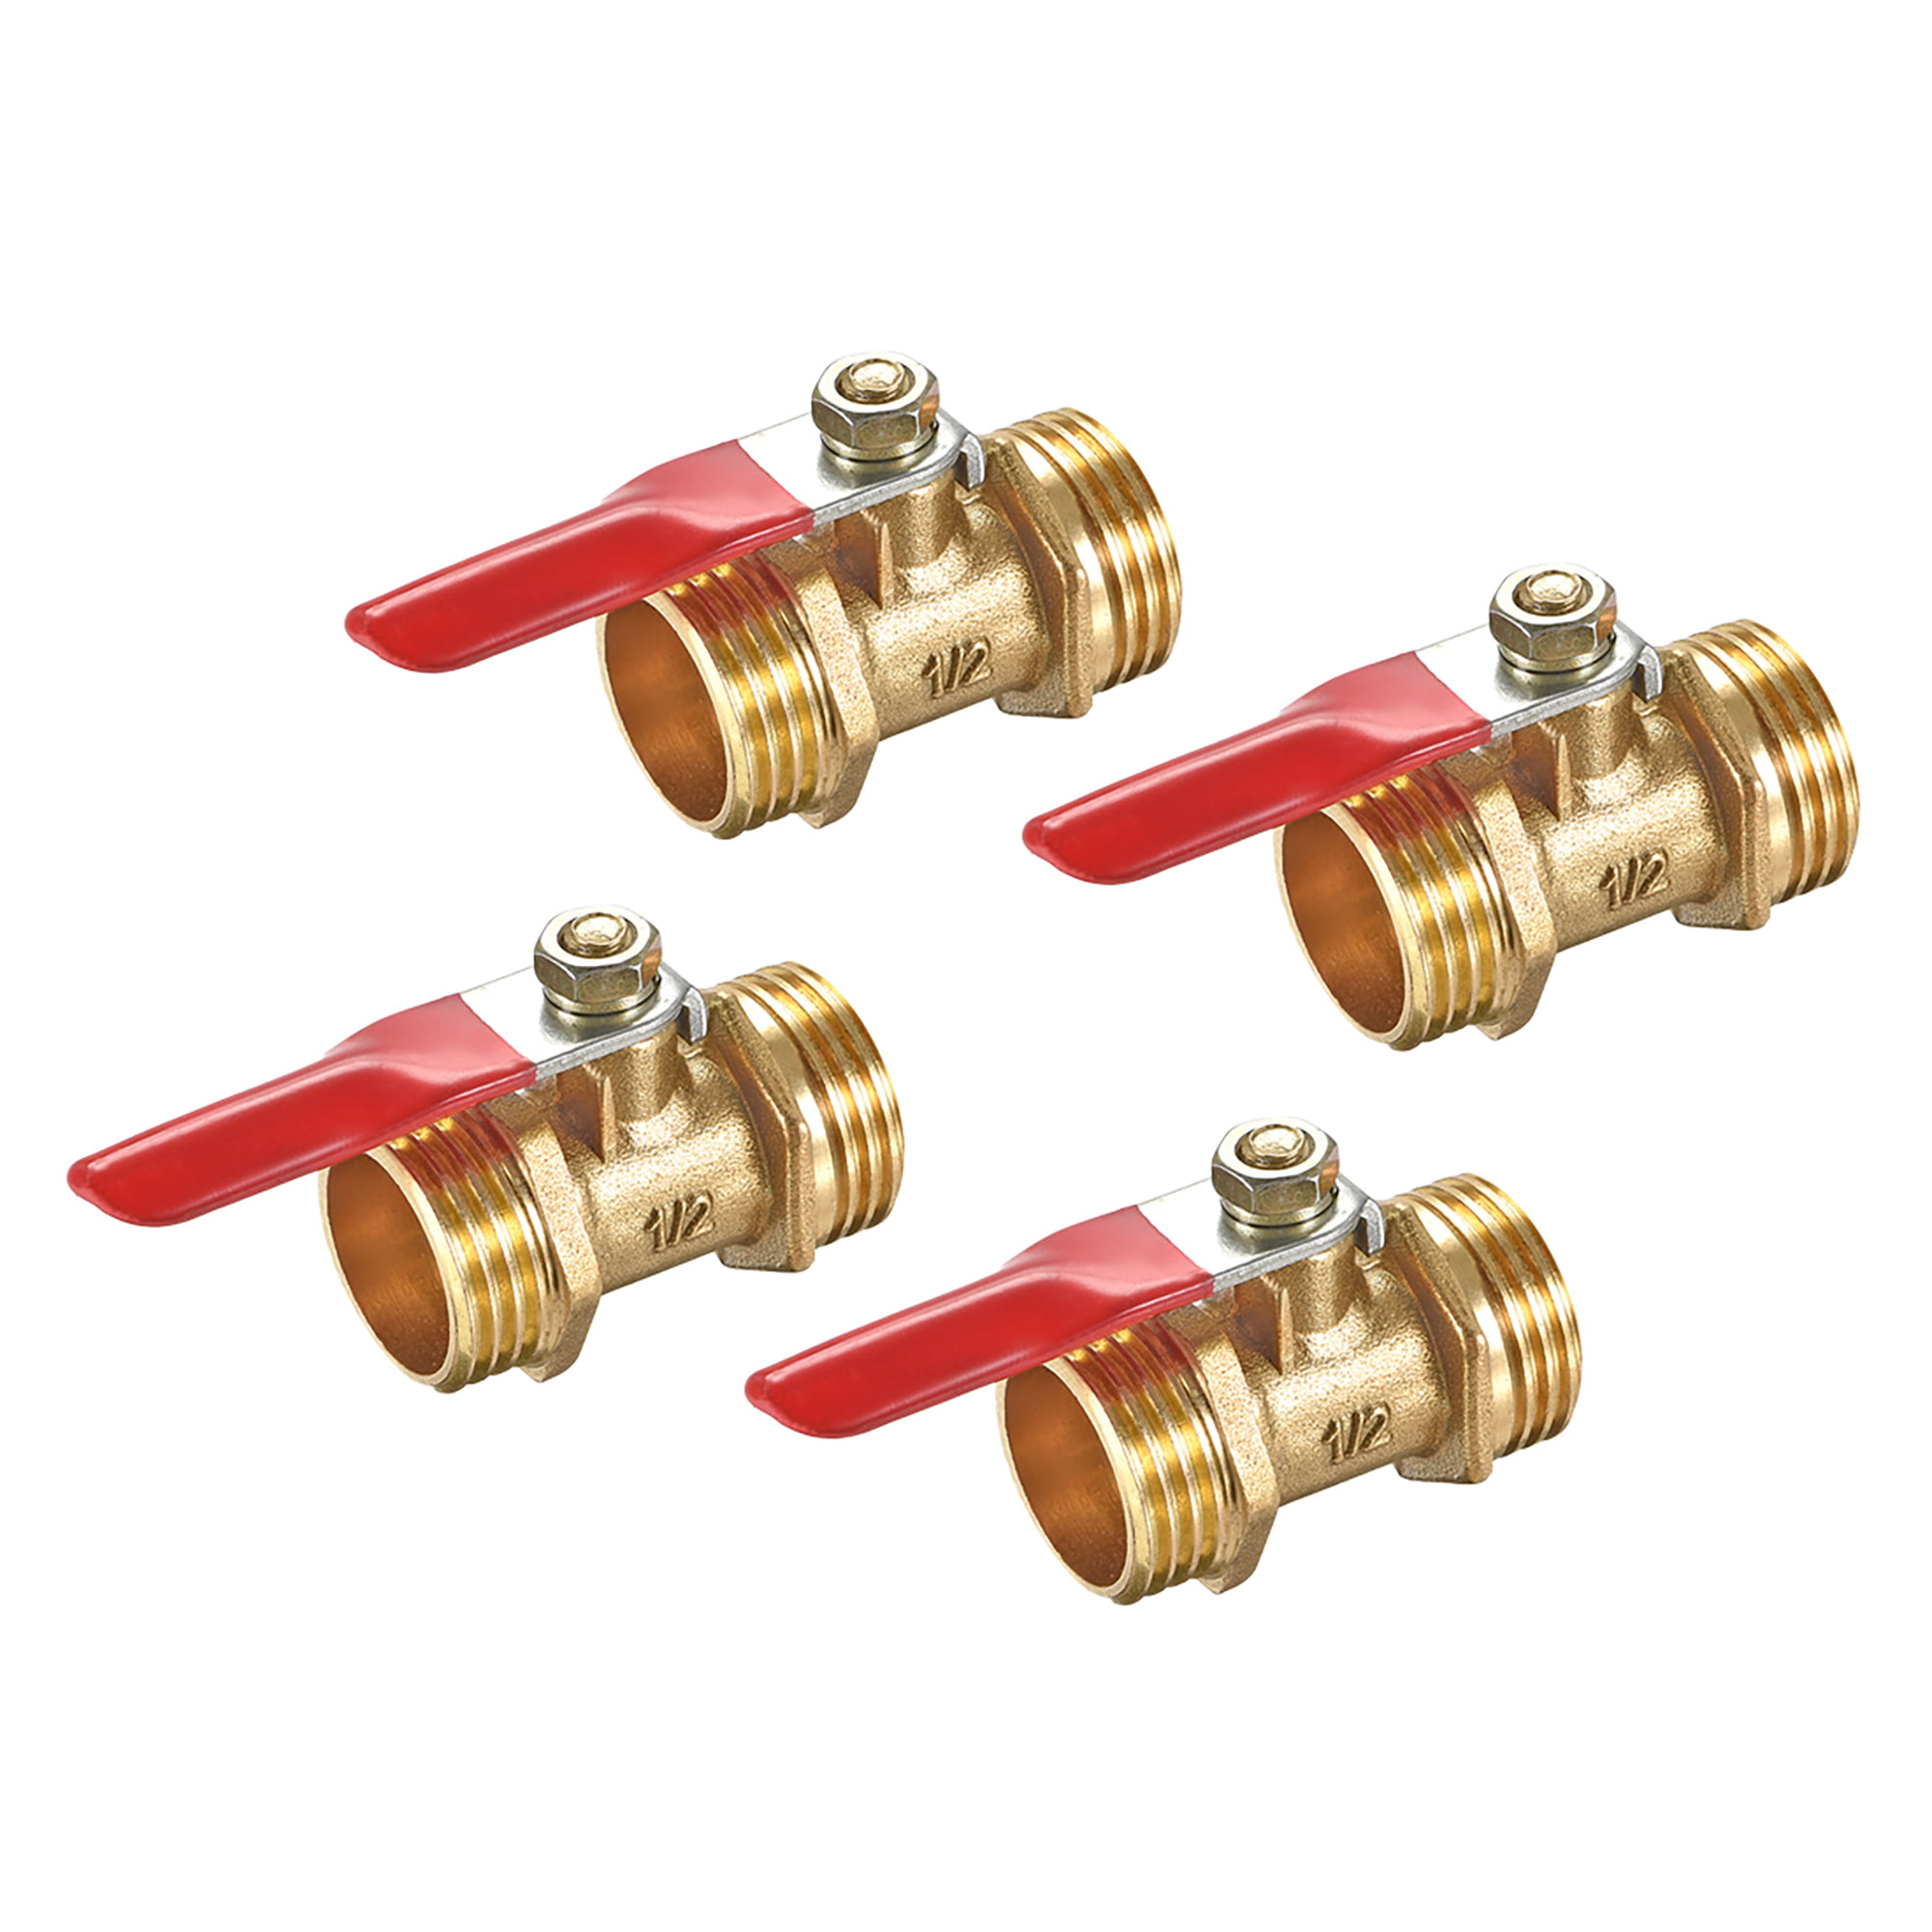 Details about   Brass Air Ball Valve Shut Off Switch G1/2 Male to Female Pipe Coupler 4Pcs